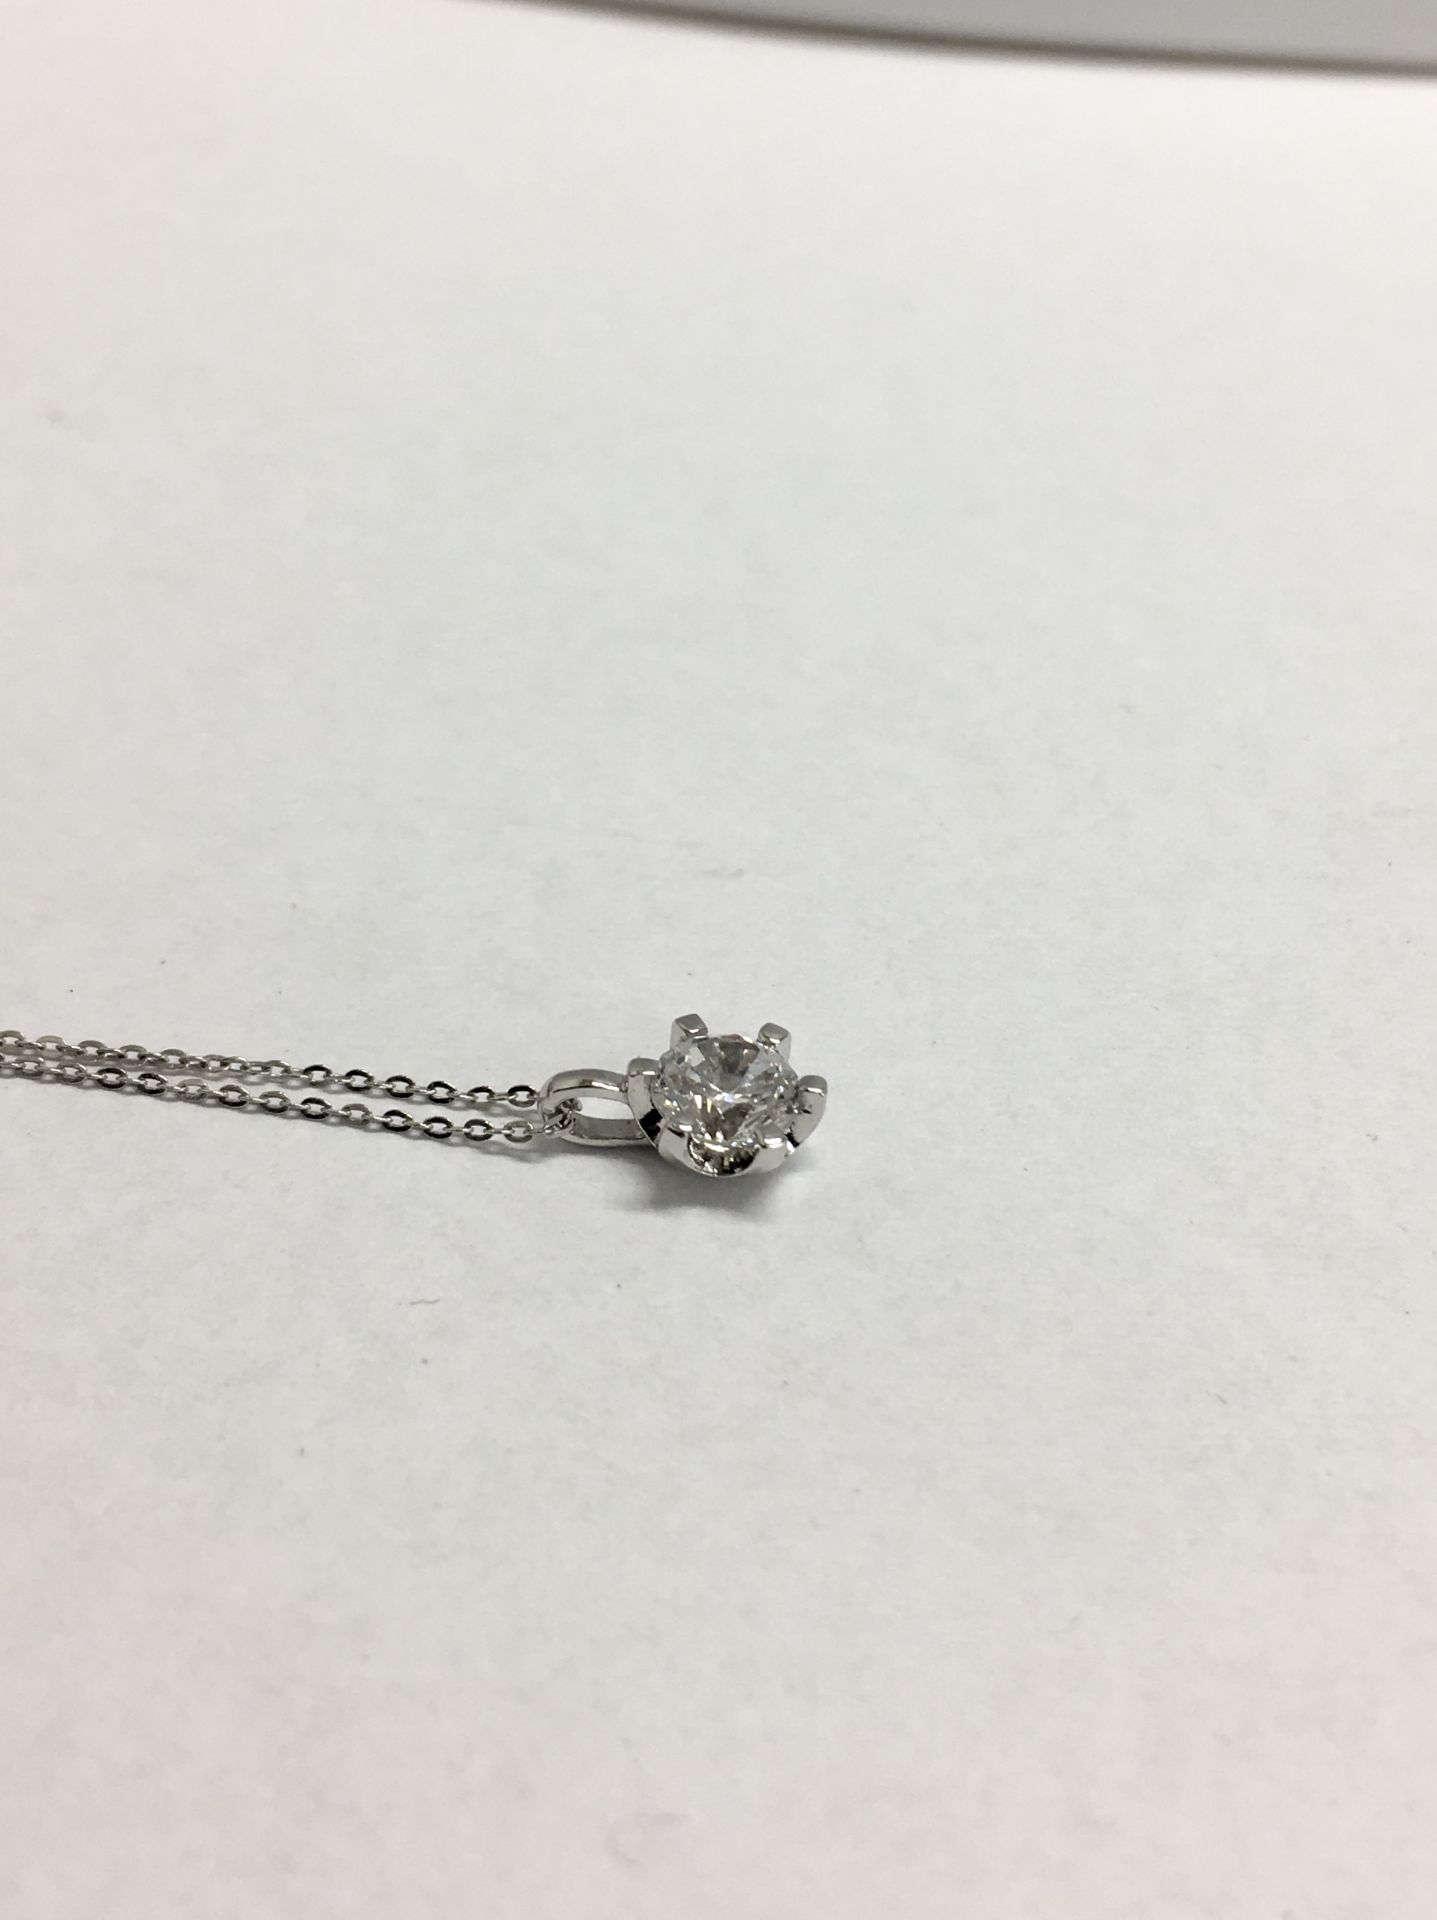 0.25ct diamond solitaire pendant set in 18ct gold. 6 claw setting - Image 3 of 4